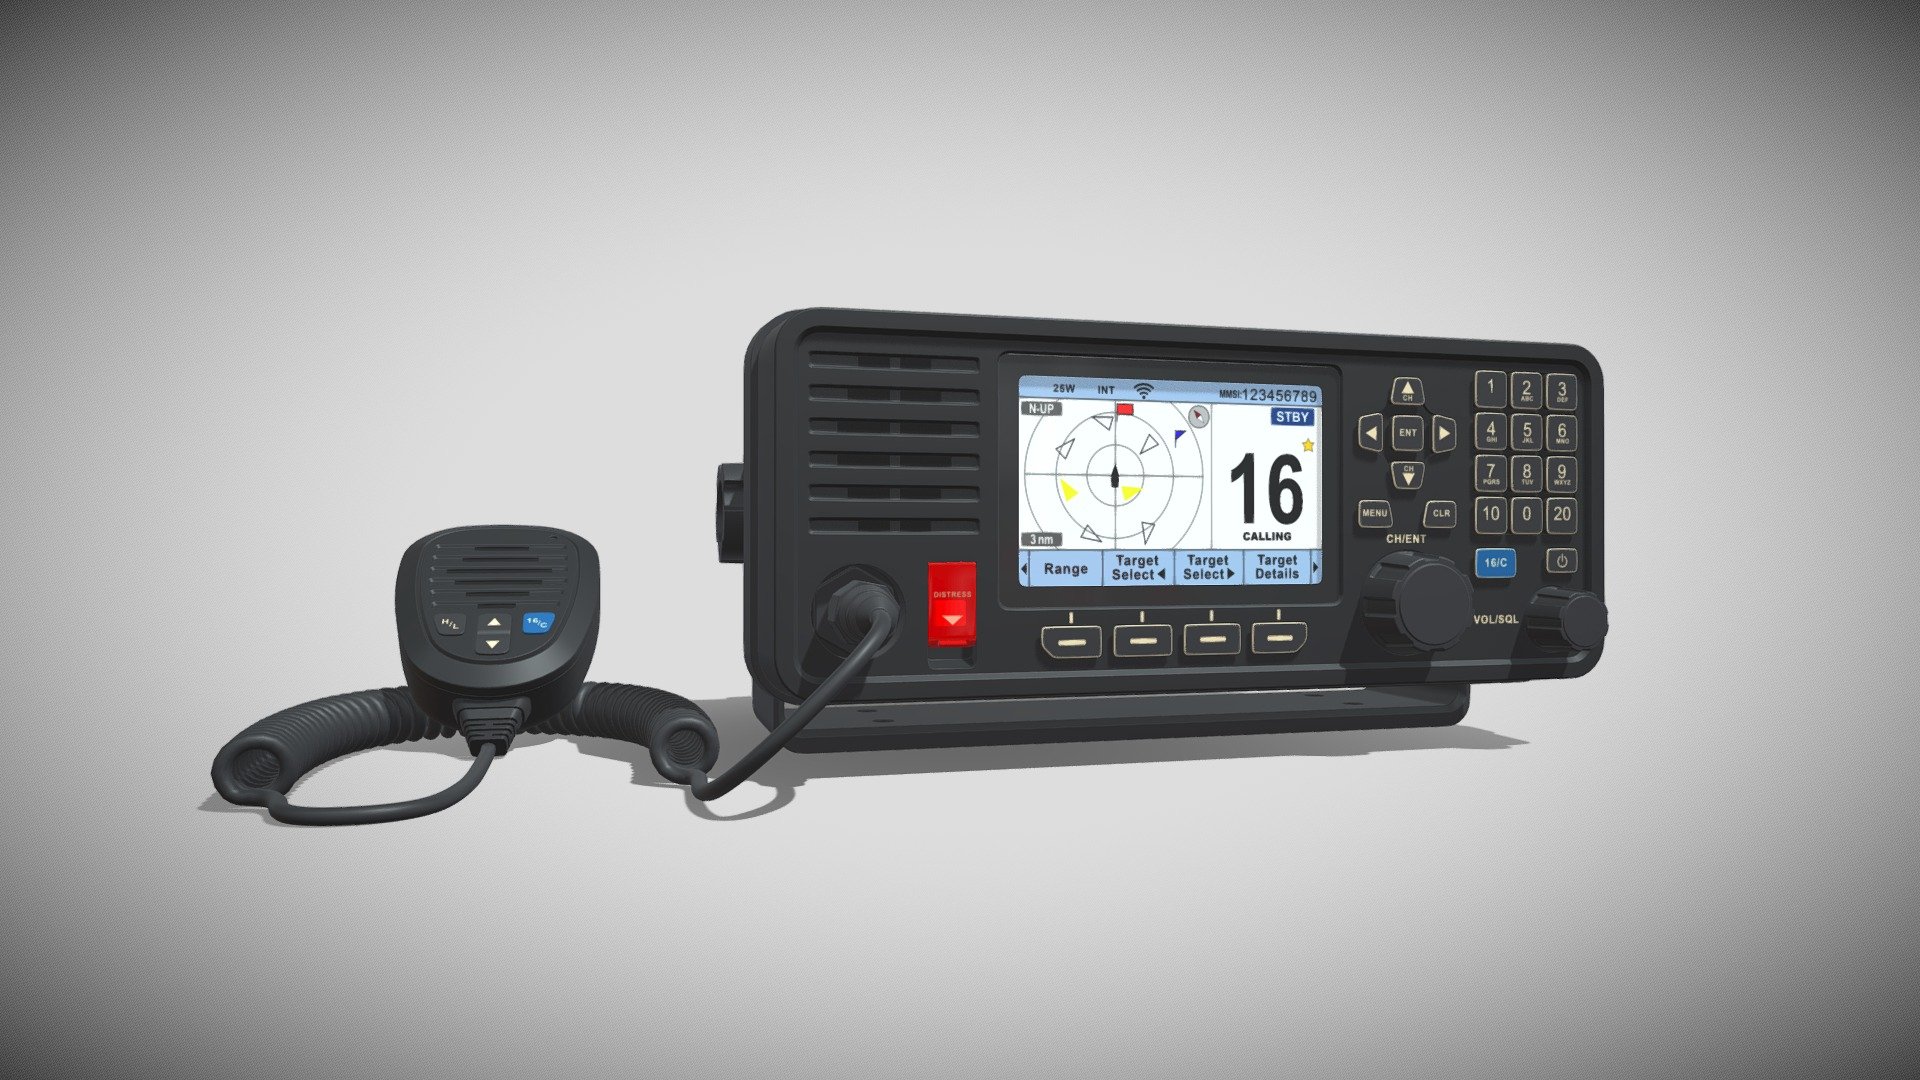 Detailed model of a Fixed Mount VHF Radio, modeled in Cinema 4D.The model was created using approximate real world dimensions.

The model has 73,475 polys and 73,635 vertices.

An additional file has been provided containing the original Cinema 4D project file, textures and other 3d export files such as 3ds, fbx and obj 3d model